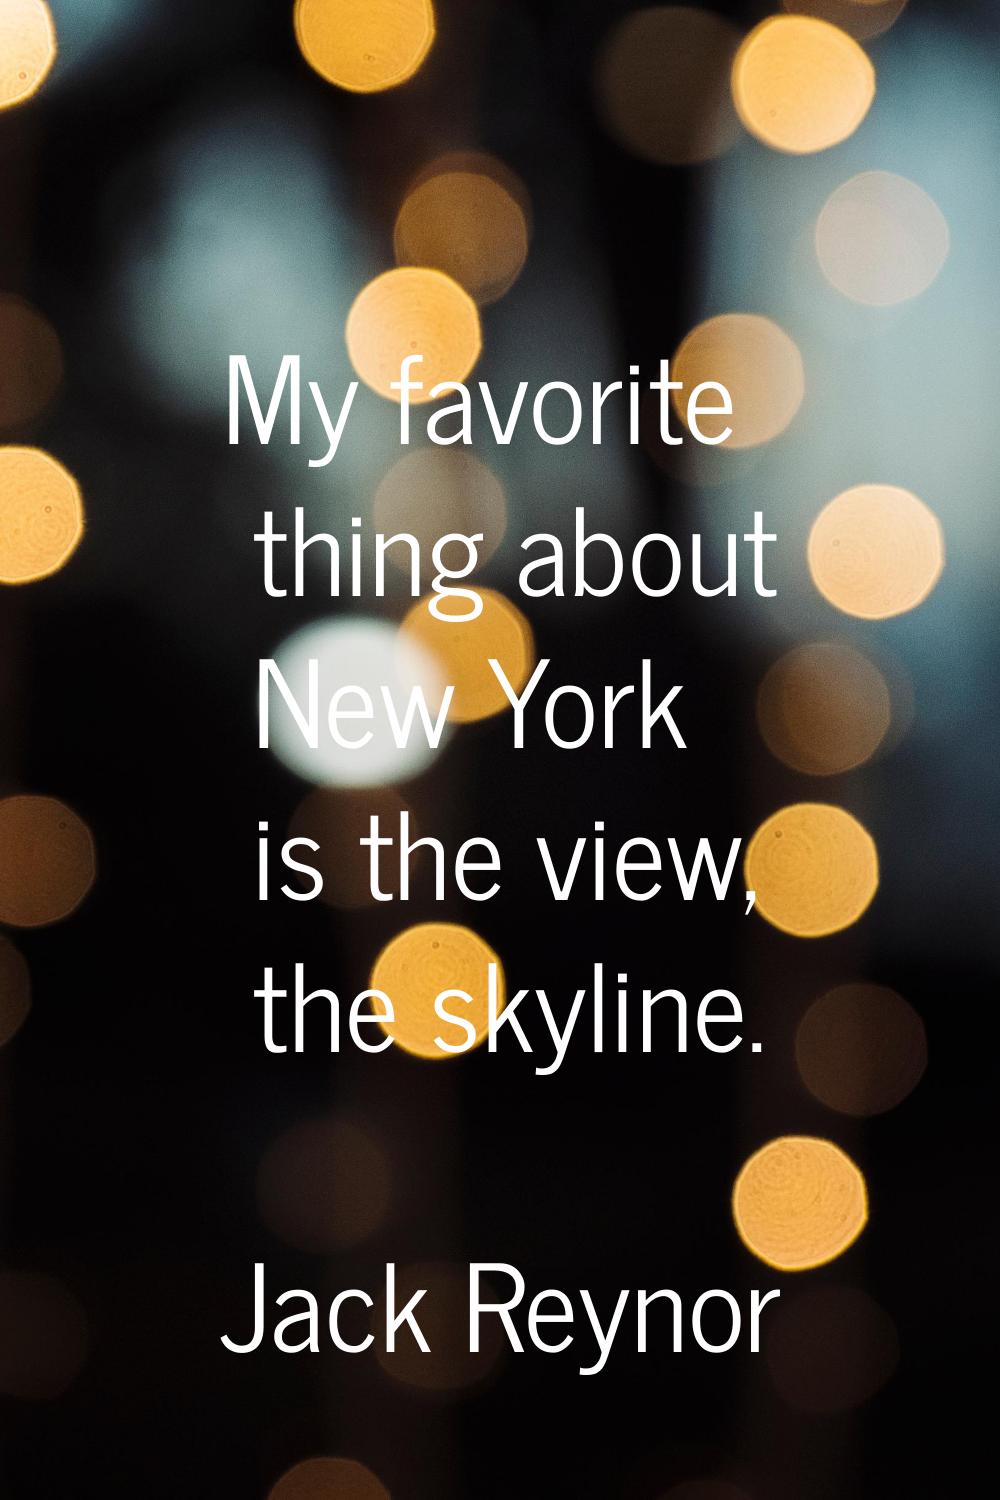 My favorite thing about New York is the view, the skyline.